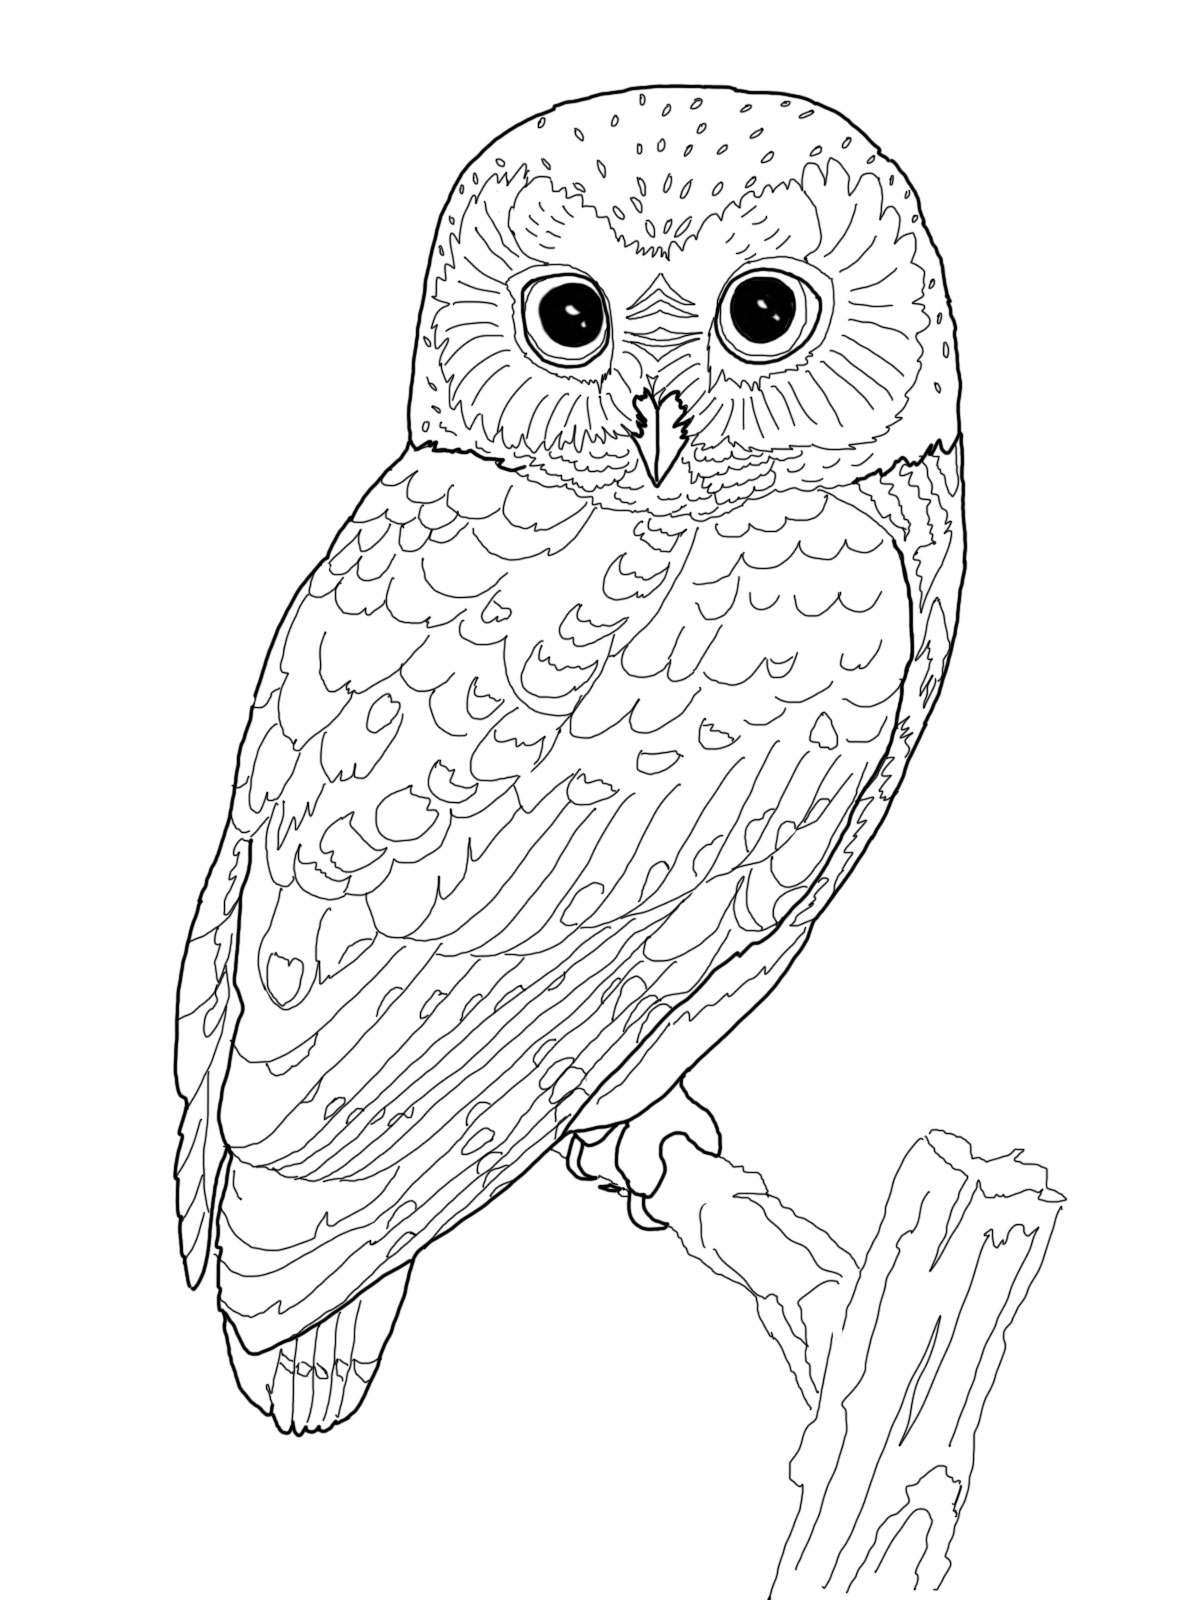 Owl Coloring Pages For Kids
 Owl Coloring Pages